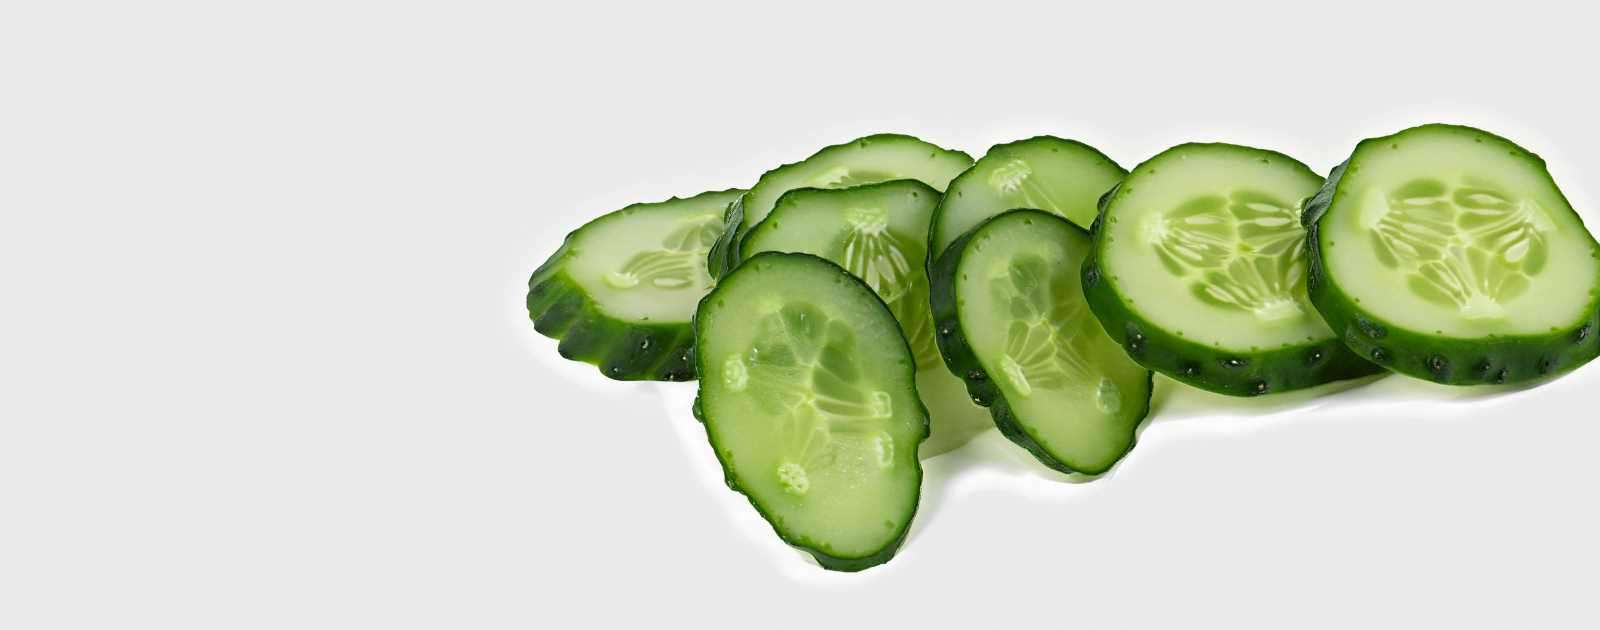 Is Cucumber a Melon or a Fruit